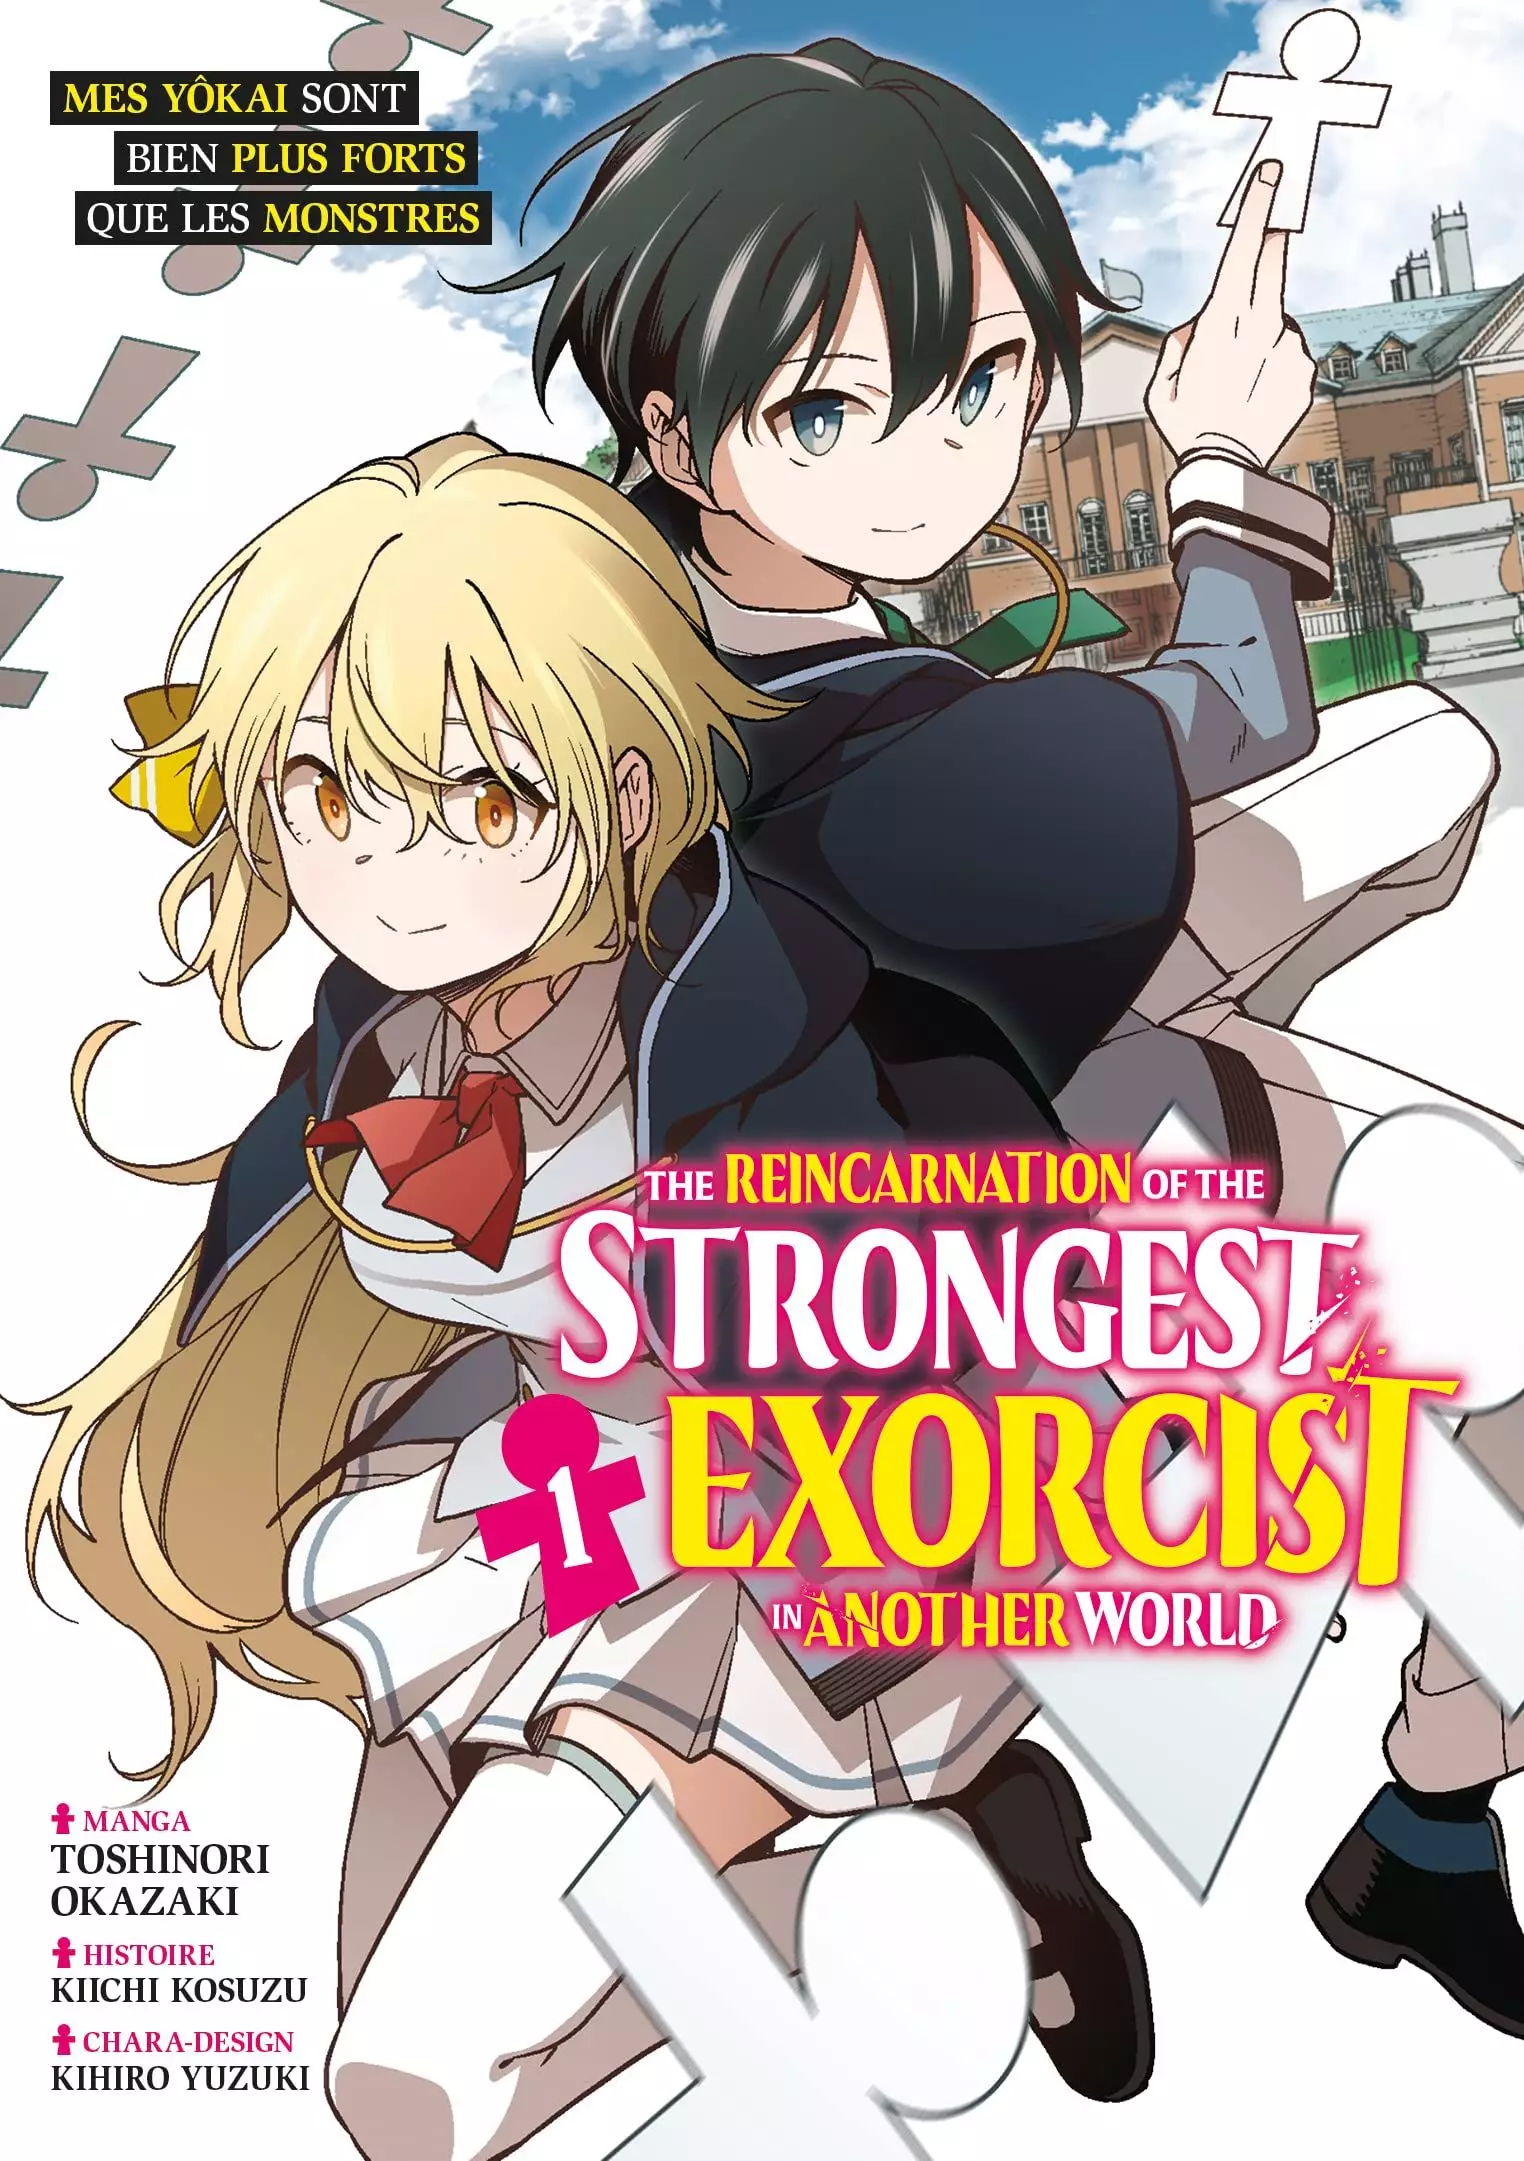 The reincarnation of The Strongest Exorcist cap completos